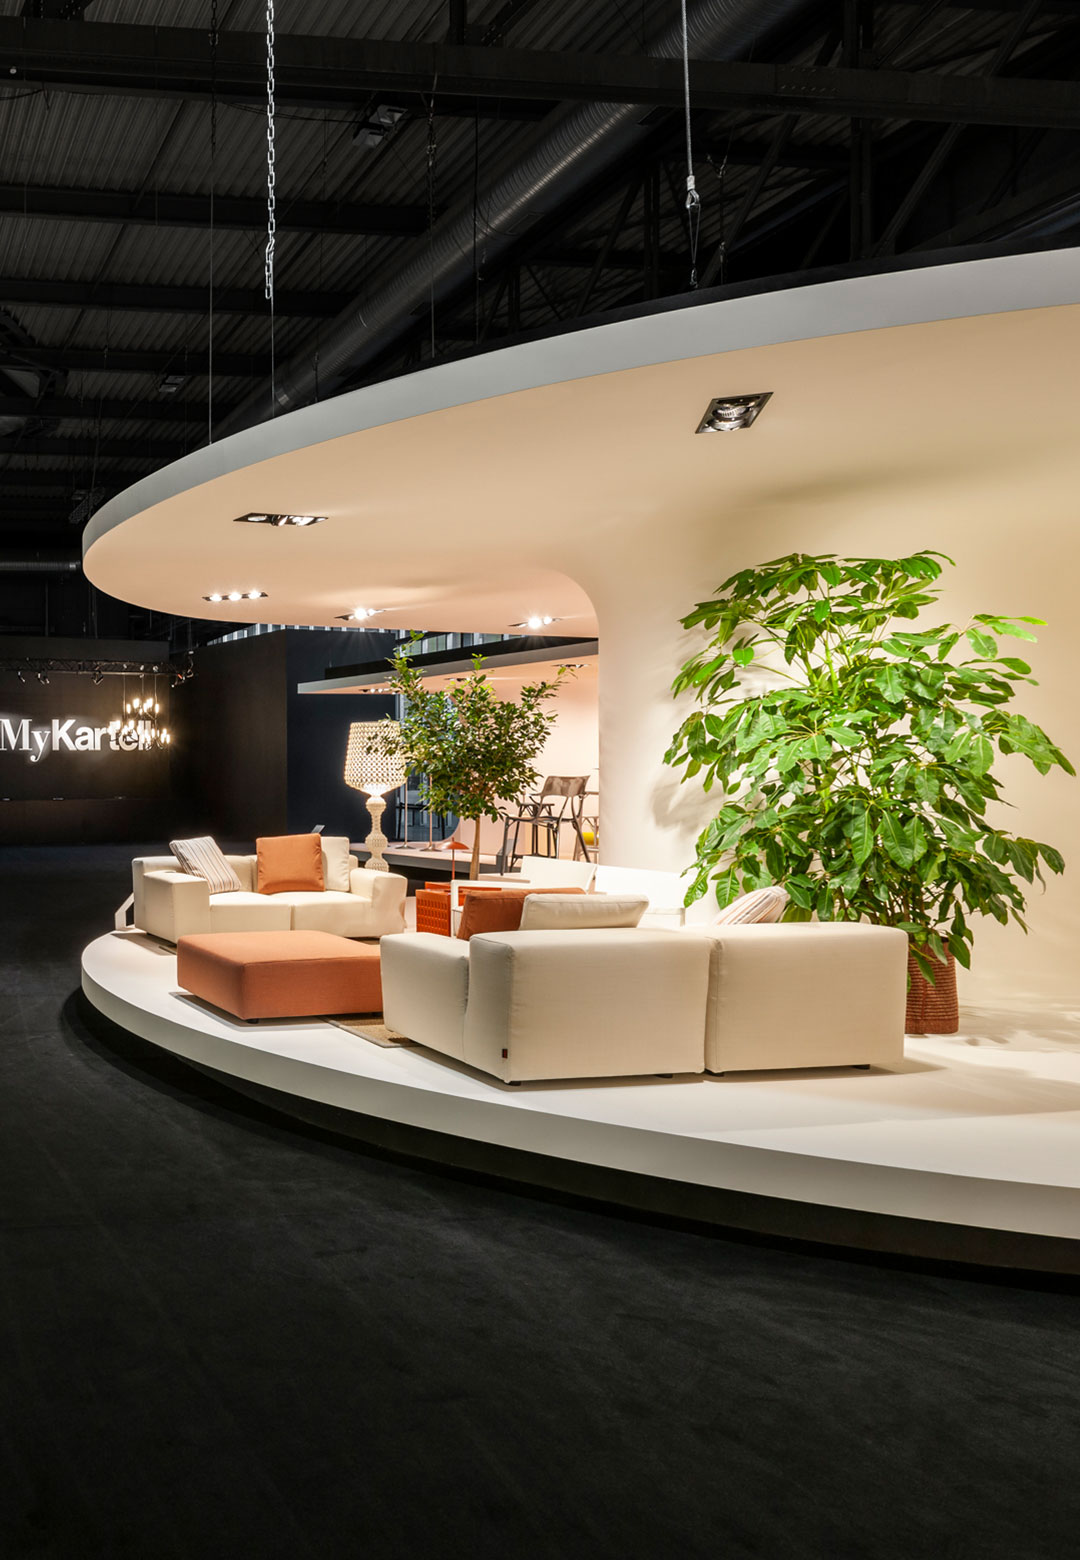 ‘My Kartell’ at Milan Design Week 2023 was dedicated to newness and design innovation